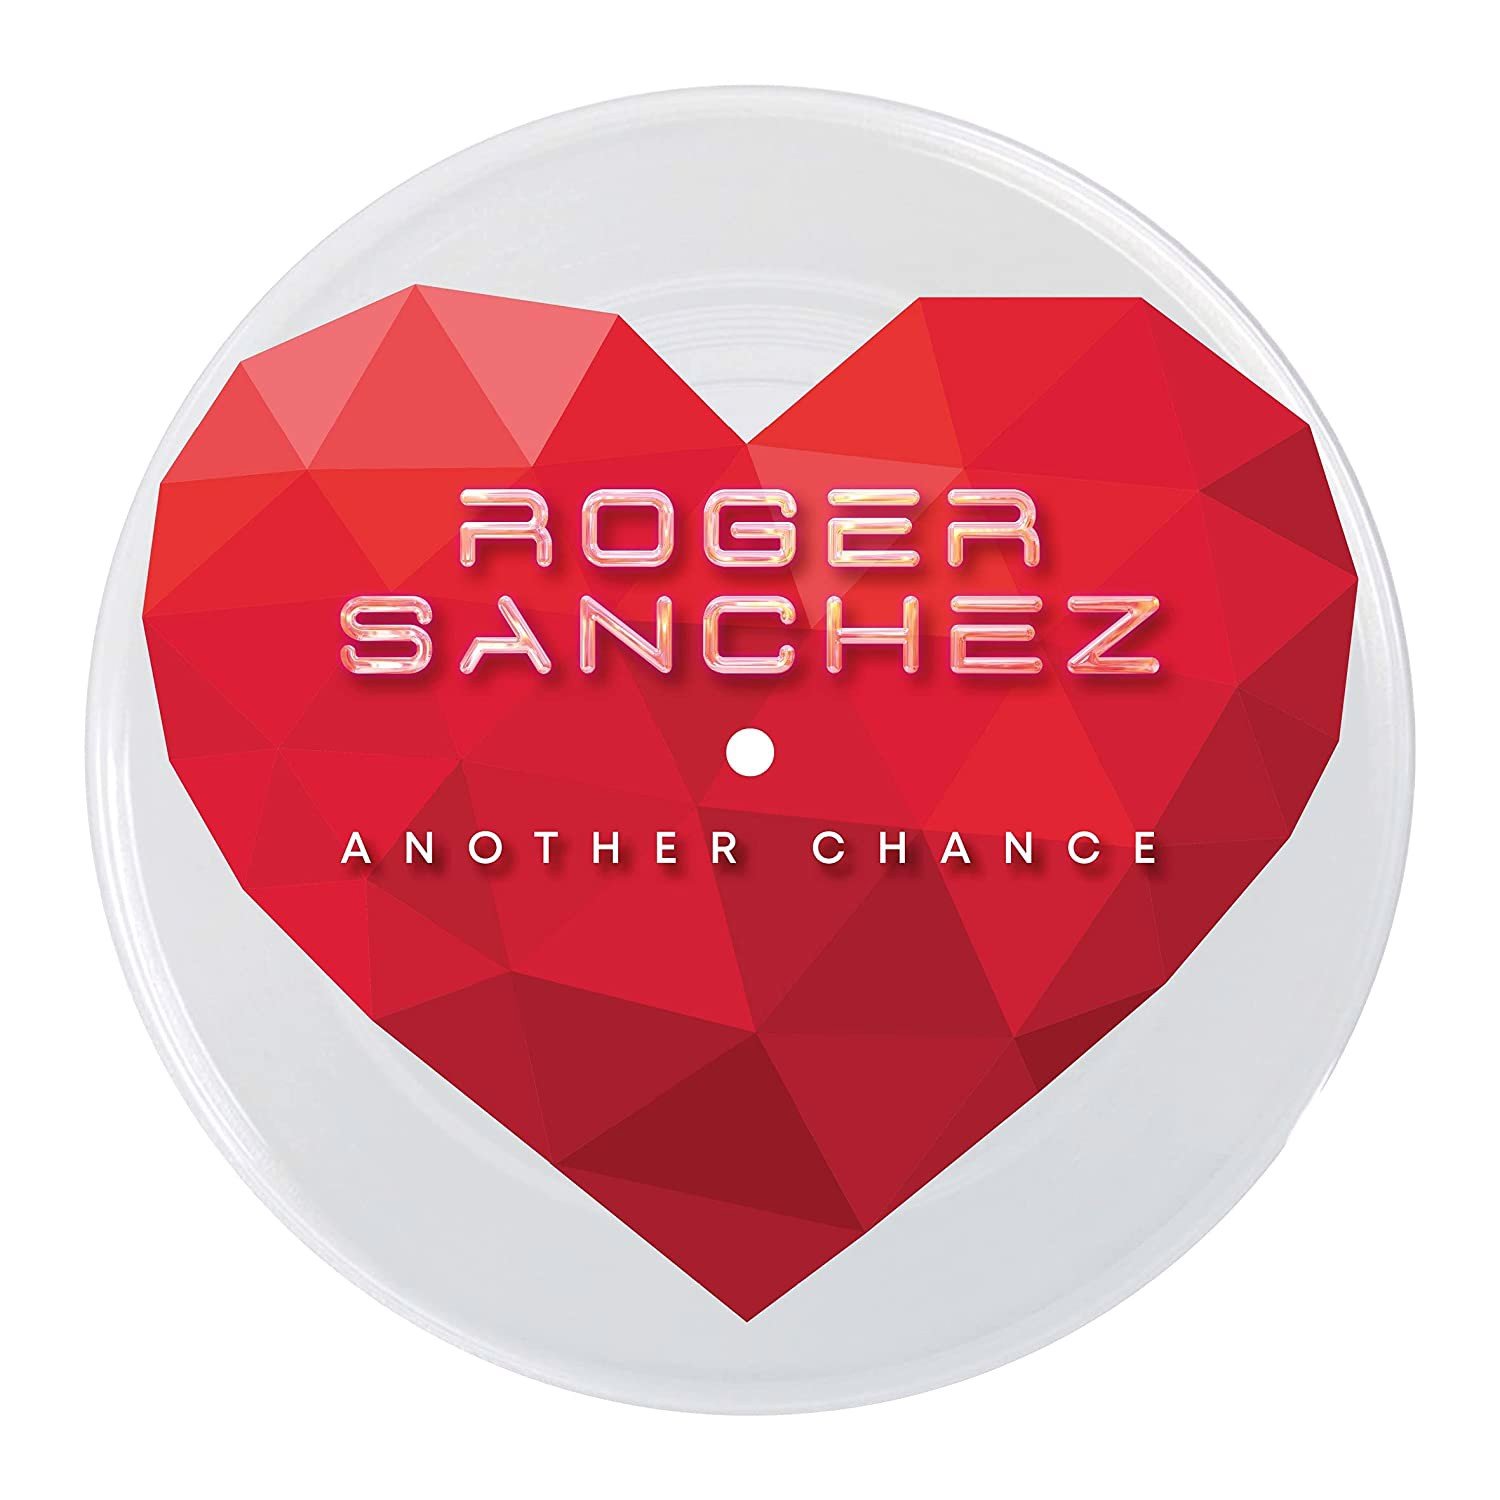 Roger Sanchez - Another Chance (20th anniversary Picture Disc) (SV)